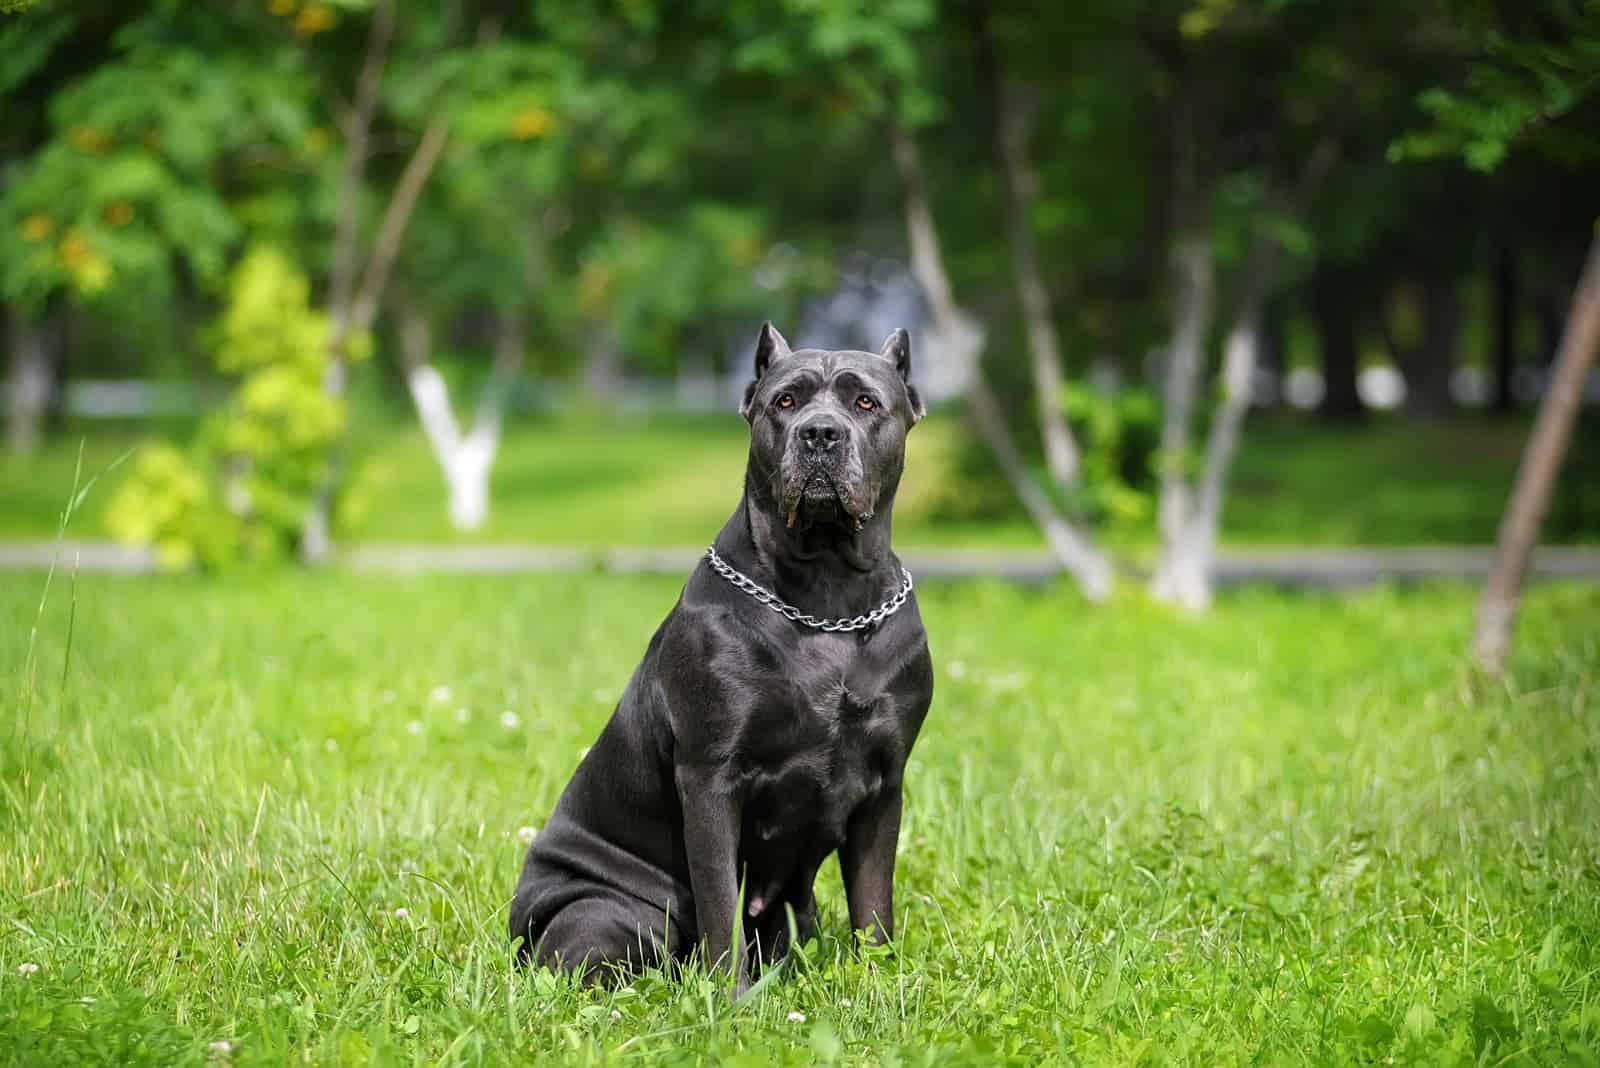 silver cane corso sitting outside in grass